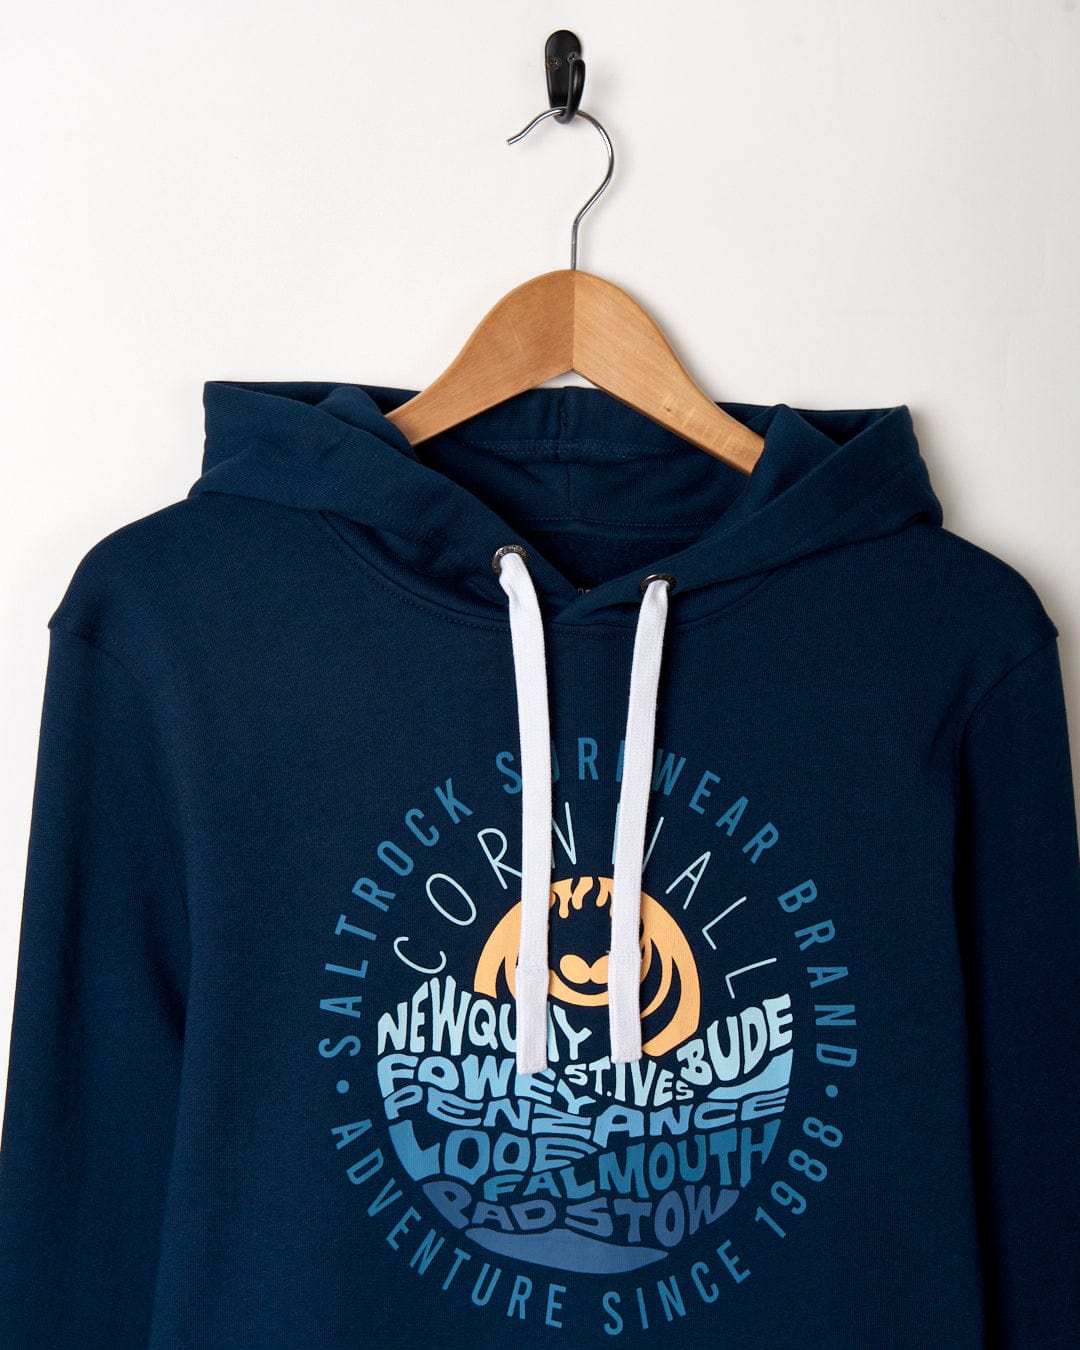 Navy blue cotton Layers Cornwall - Mens Pop Hoodie - Blue with white drawstrings hanging on a wall hook, featuring a chest print with text related to Cornwall by Saltrock.